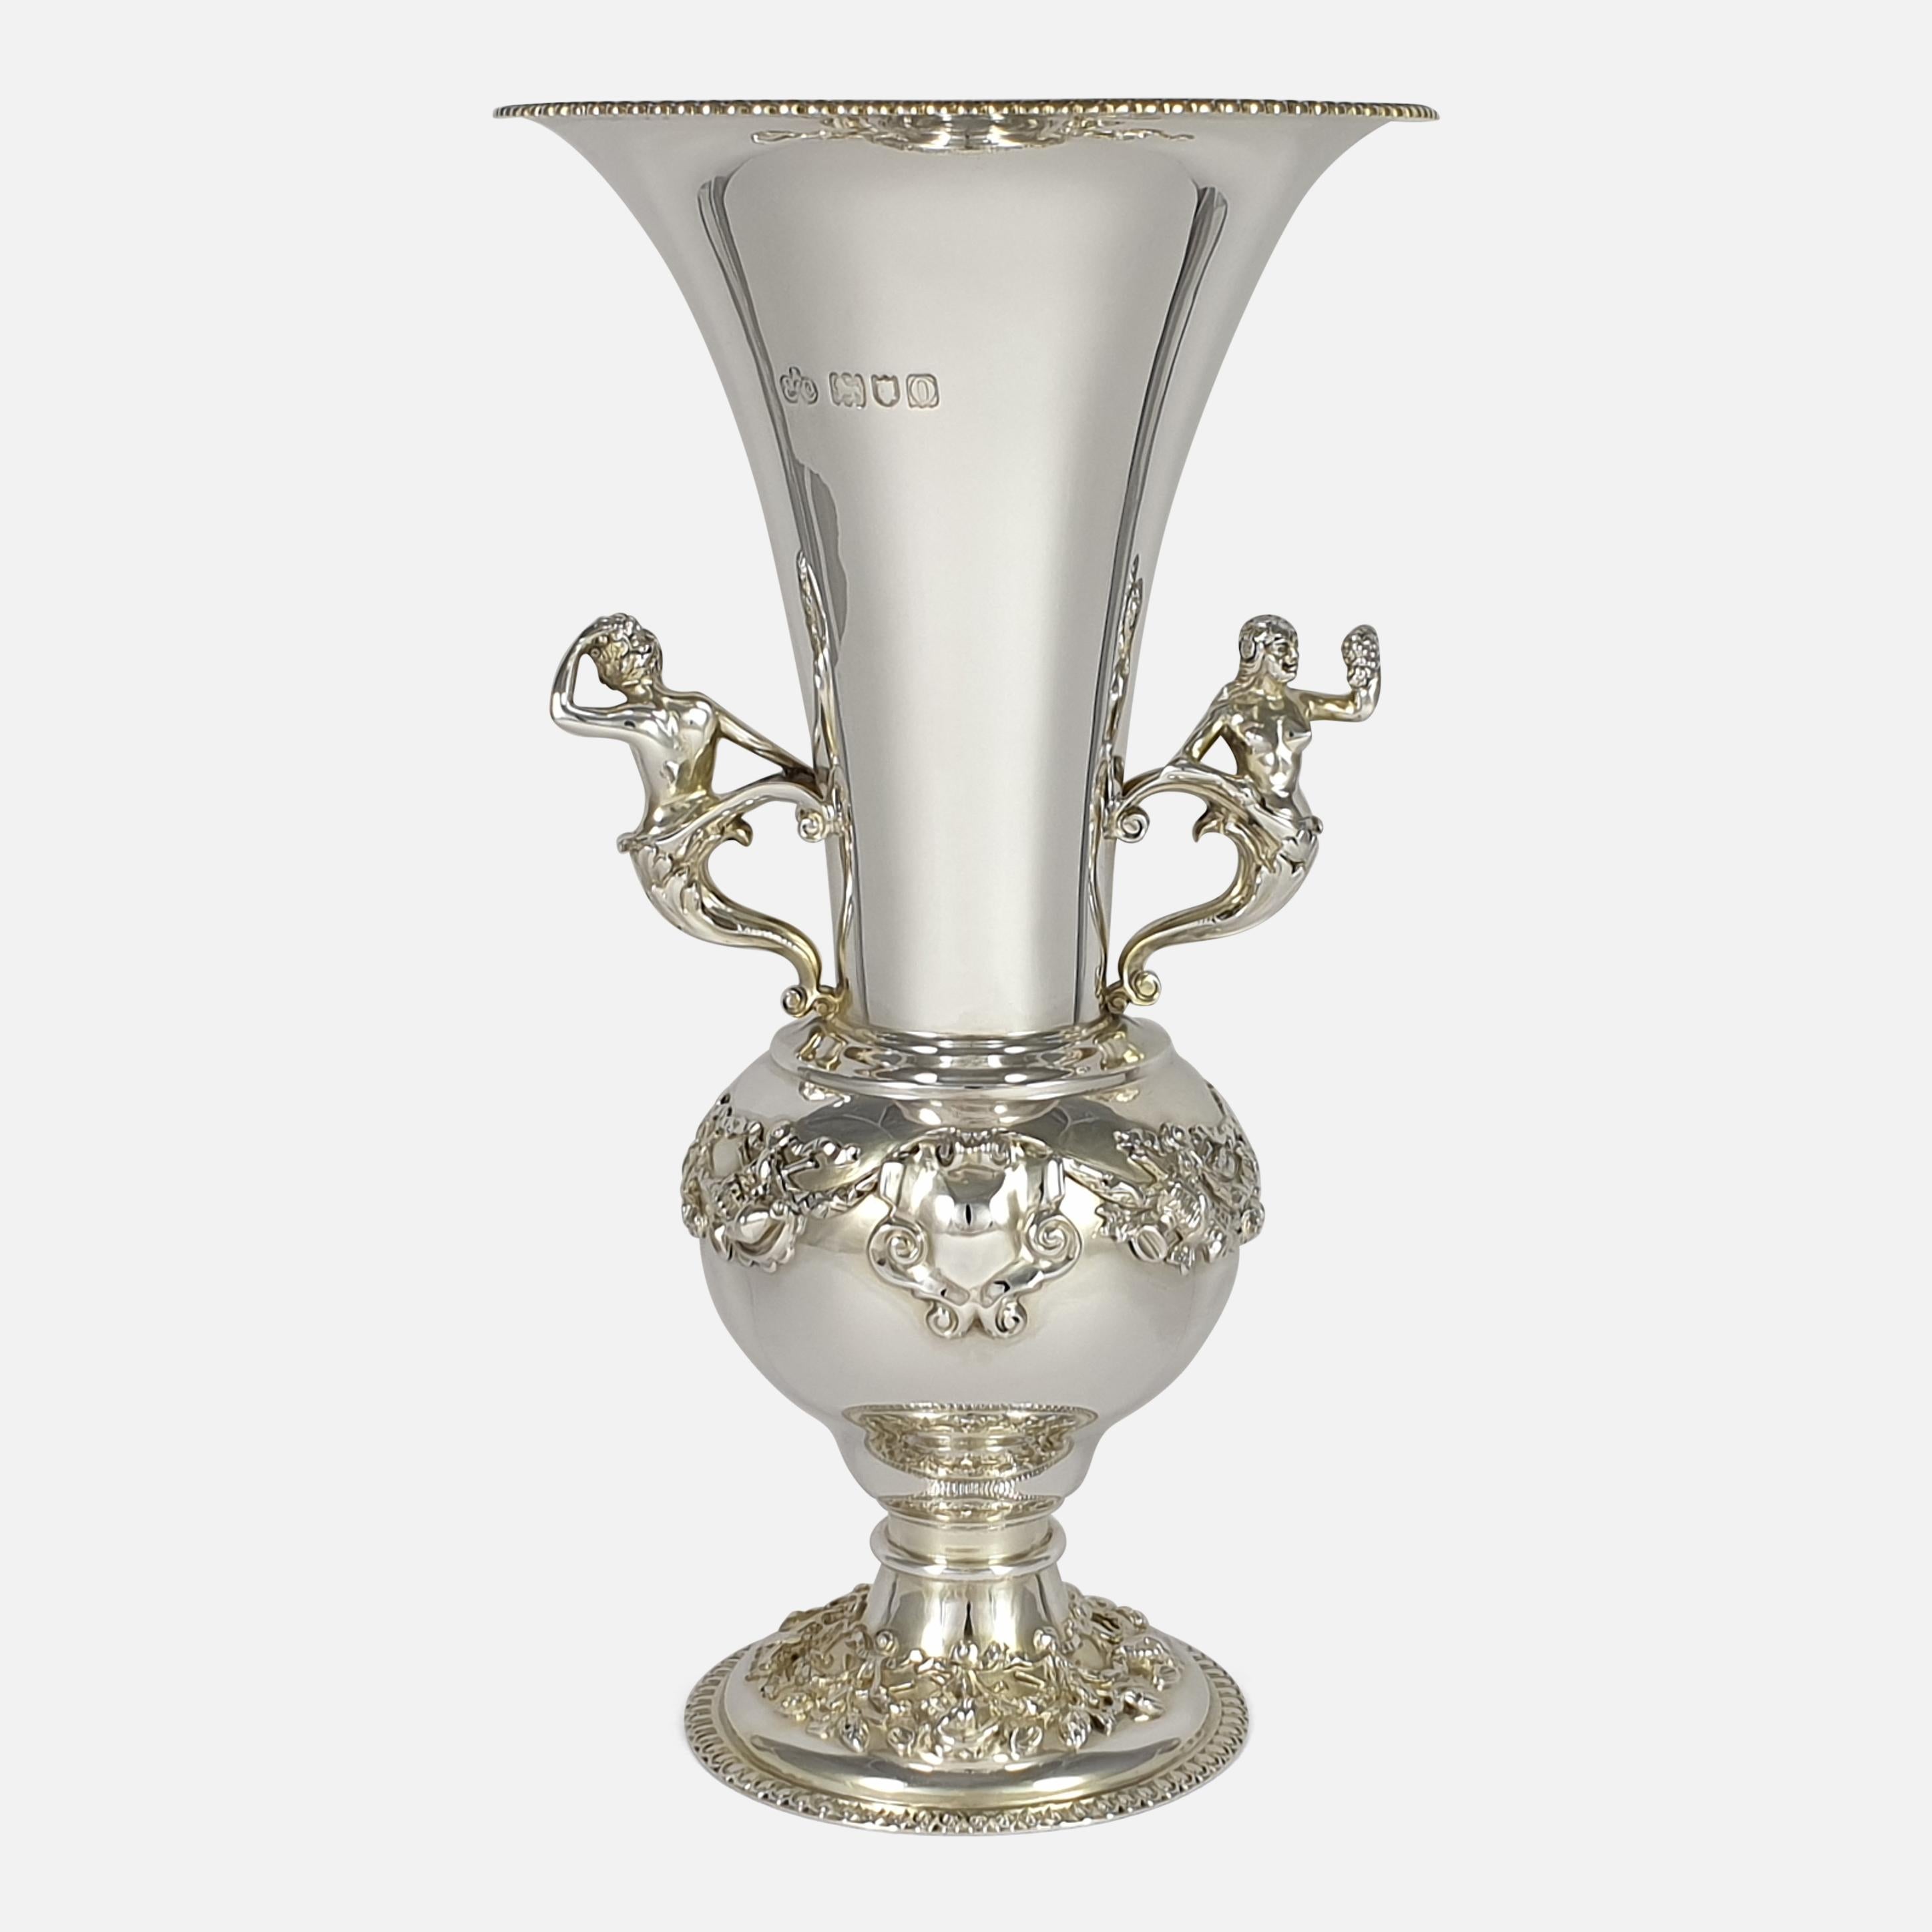 An Edwardian sterling silver vase by Elkington & Co. Ltd, London, 1909. The bulbous body is raised on a pedestal base that leads to a flared neck. The vase is decorated with vacant cartouches, musical instruments and scrolls, and is completed with a